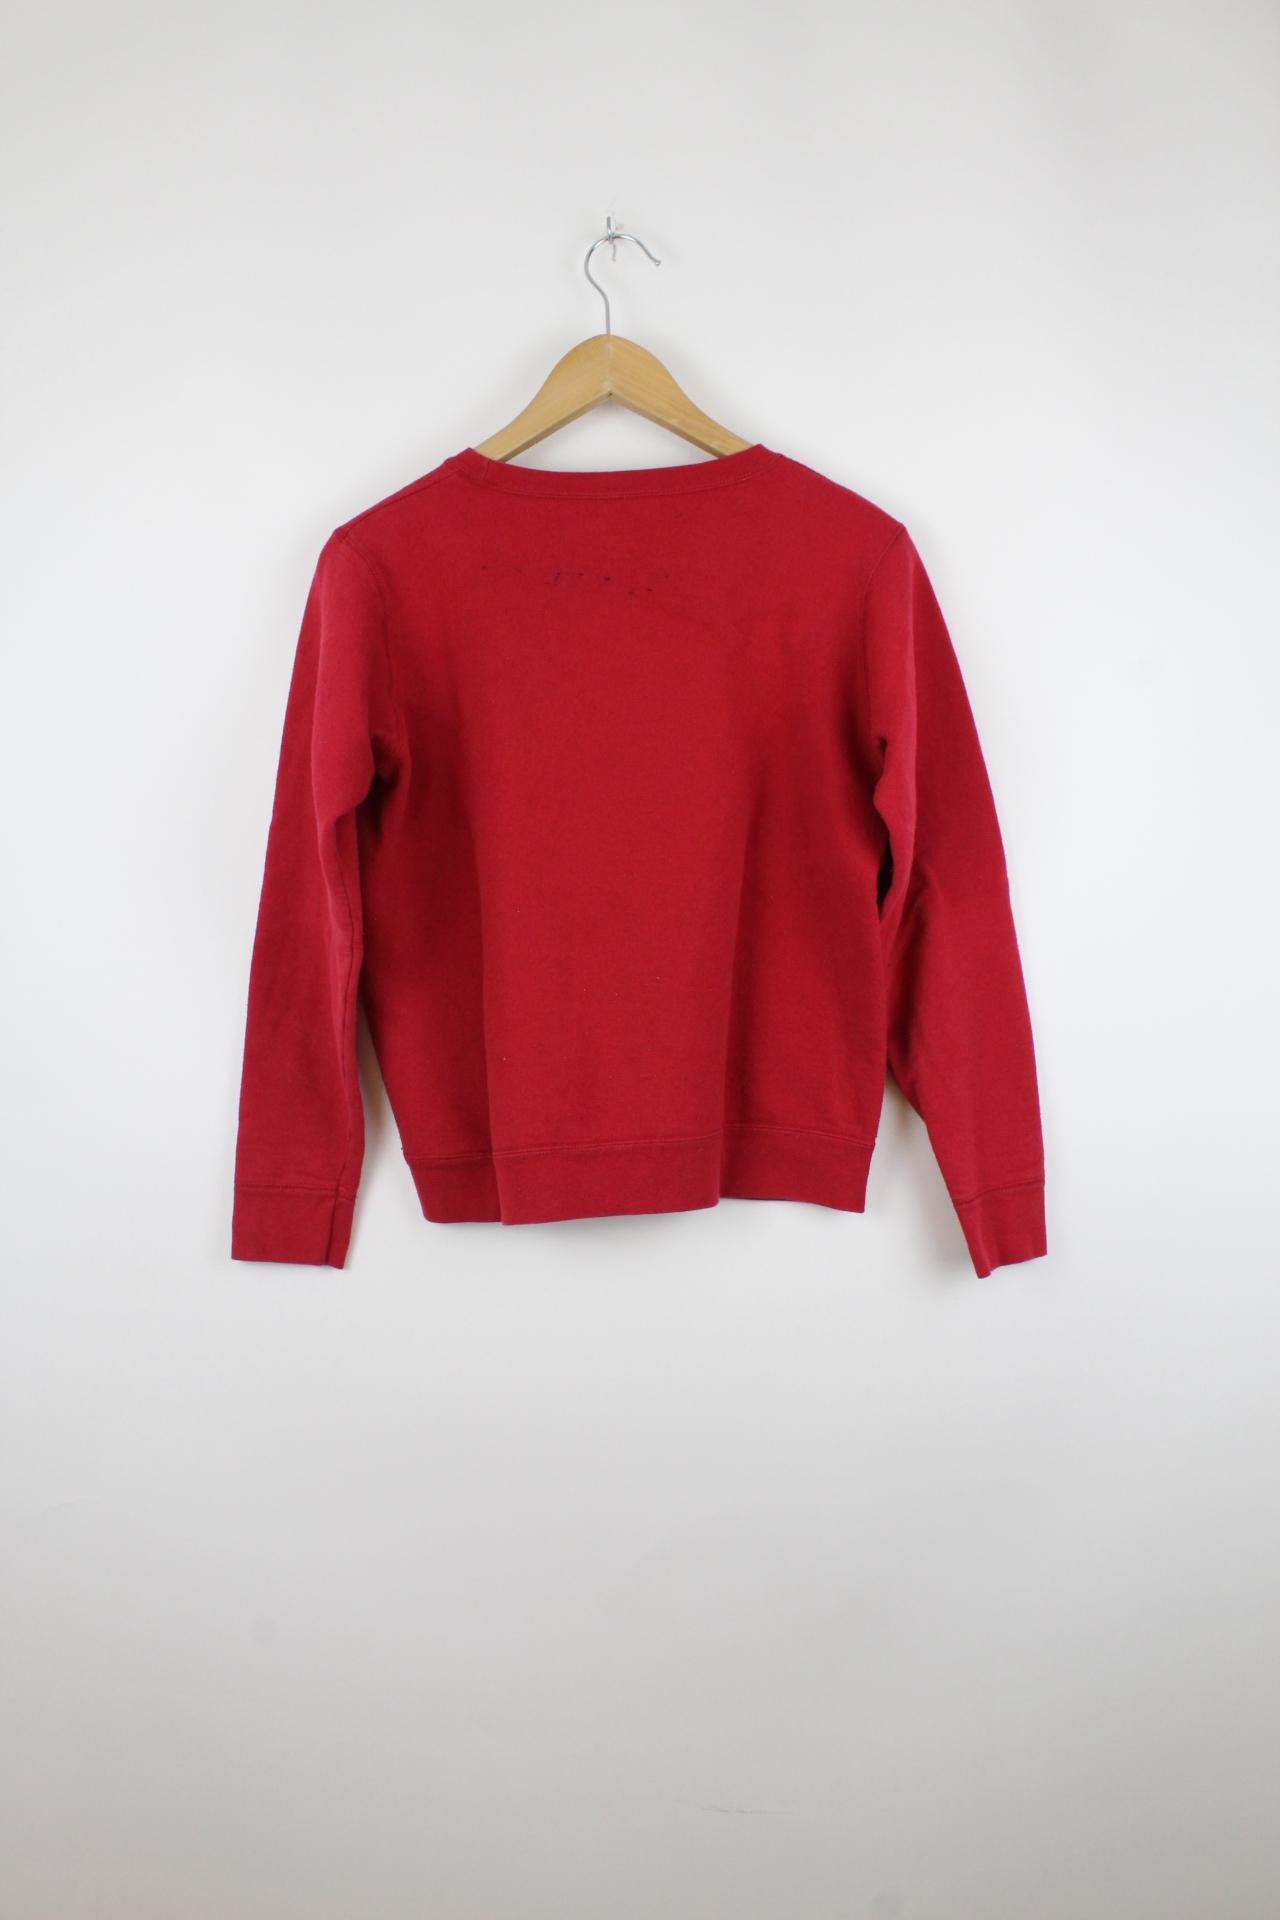 Vintage Christmas Sweater Rot - M